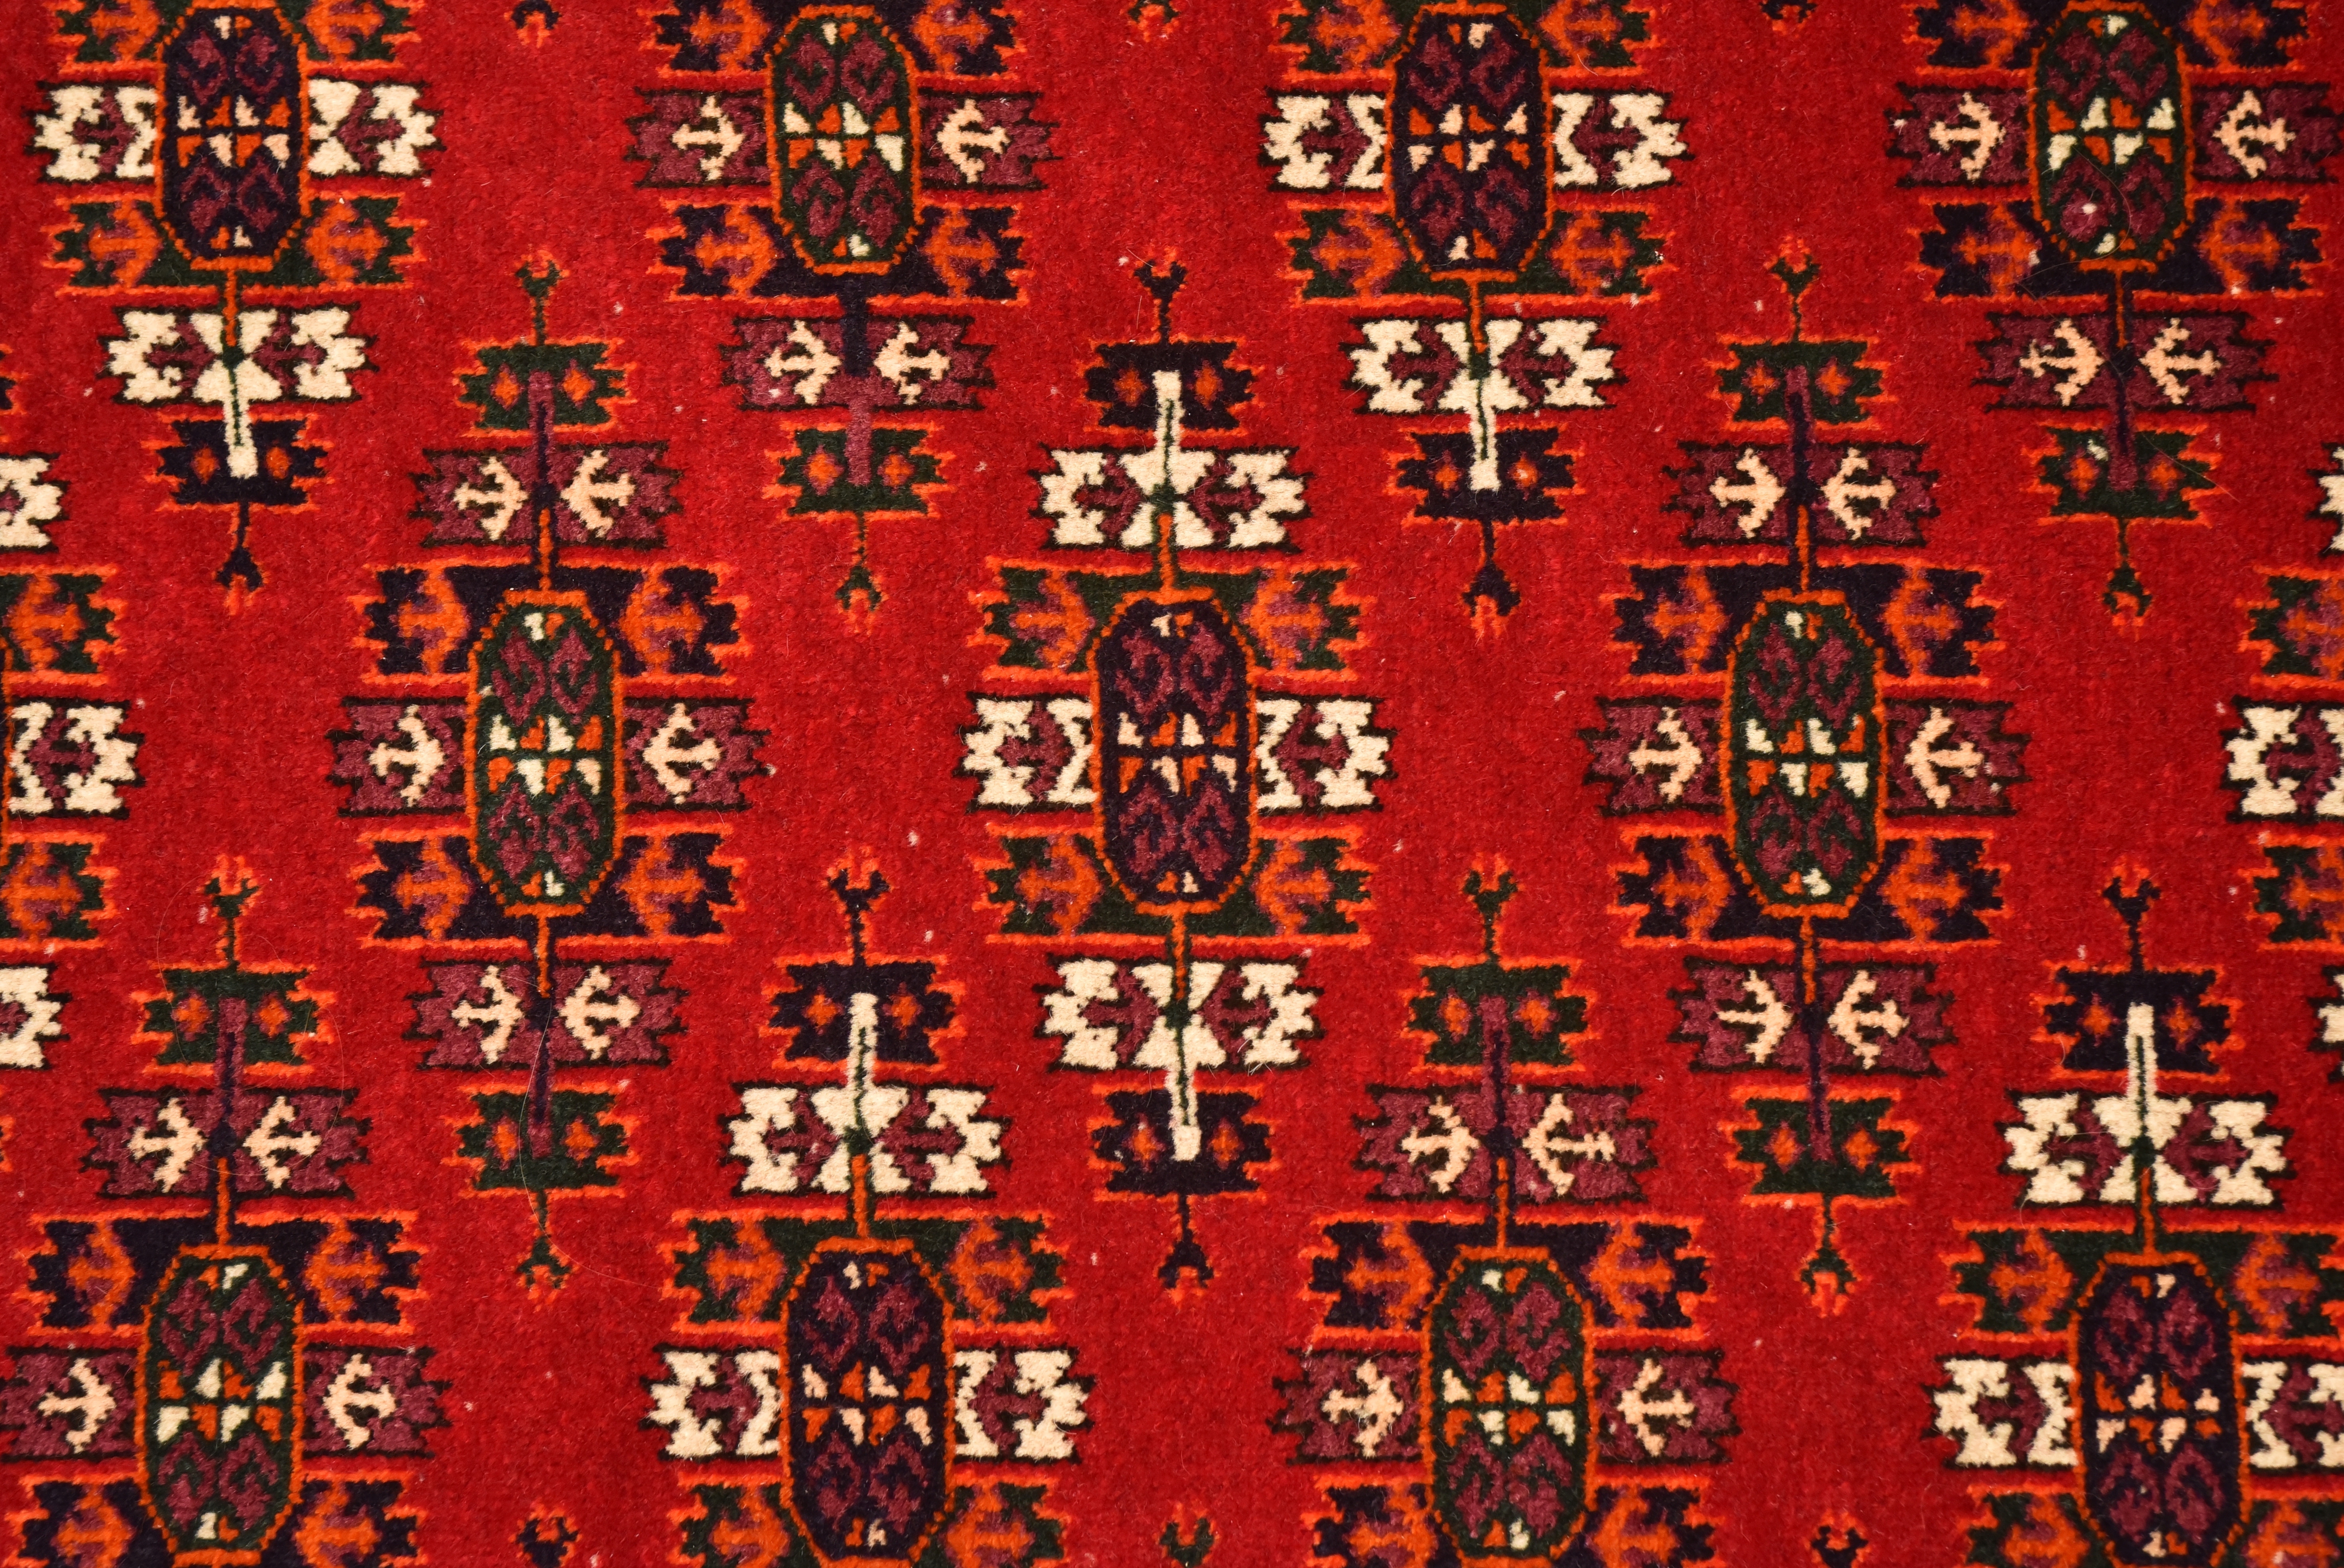 Visitors are treated to stunning examples of Turkmen carpets. © Petr Hanousek / Shutterstock